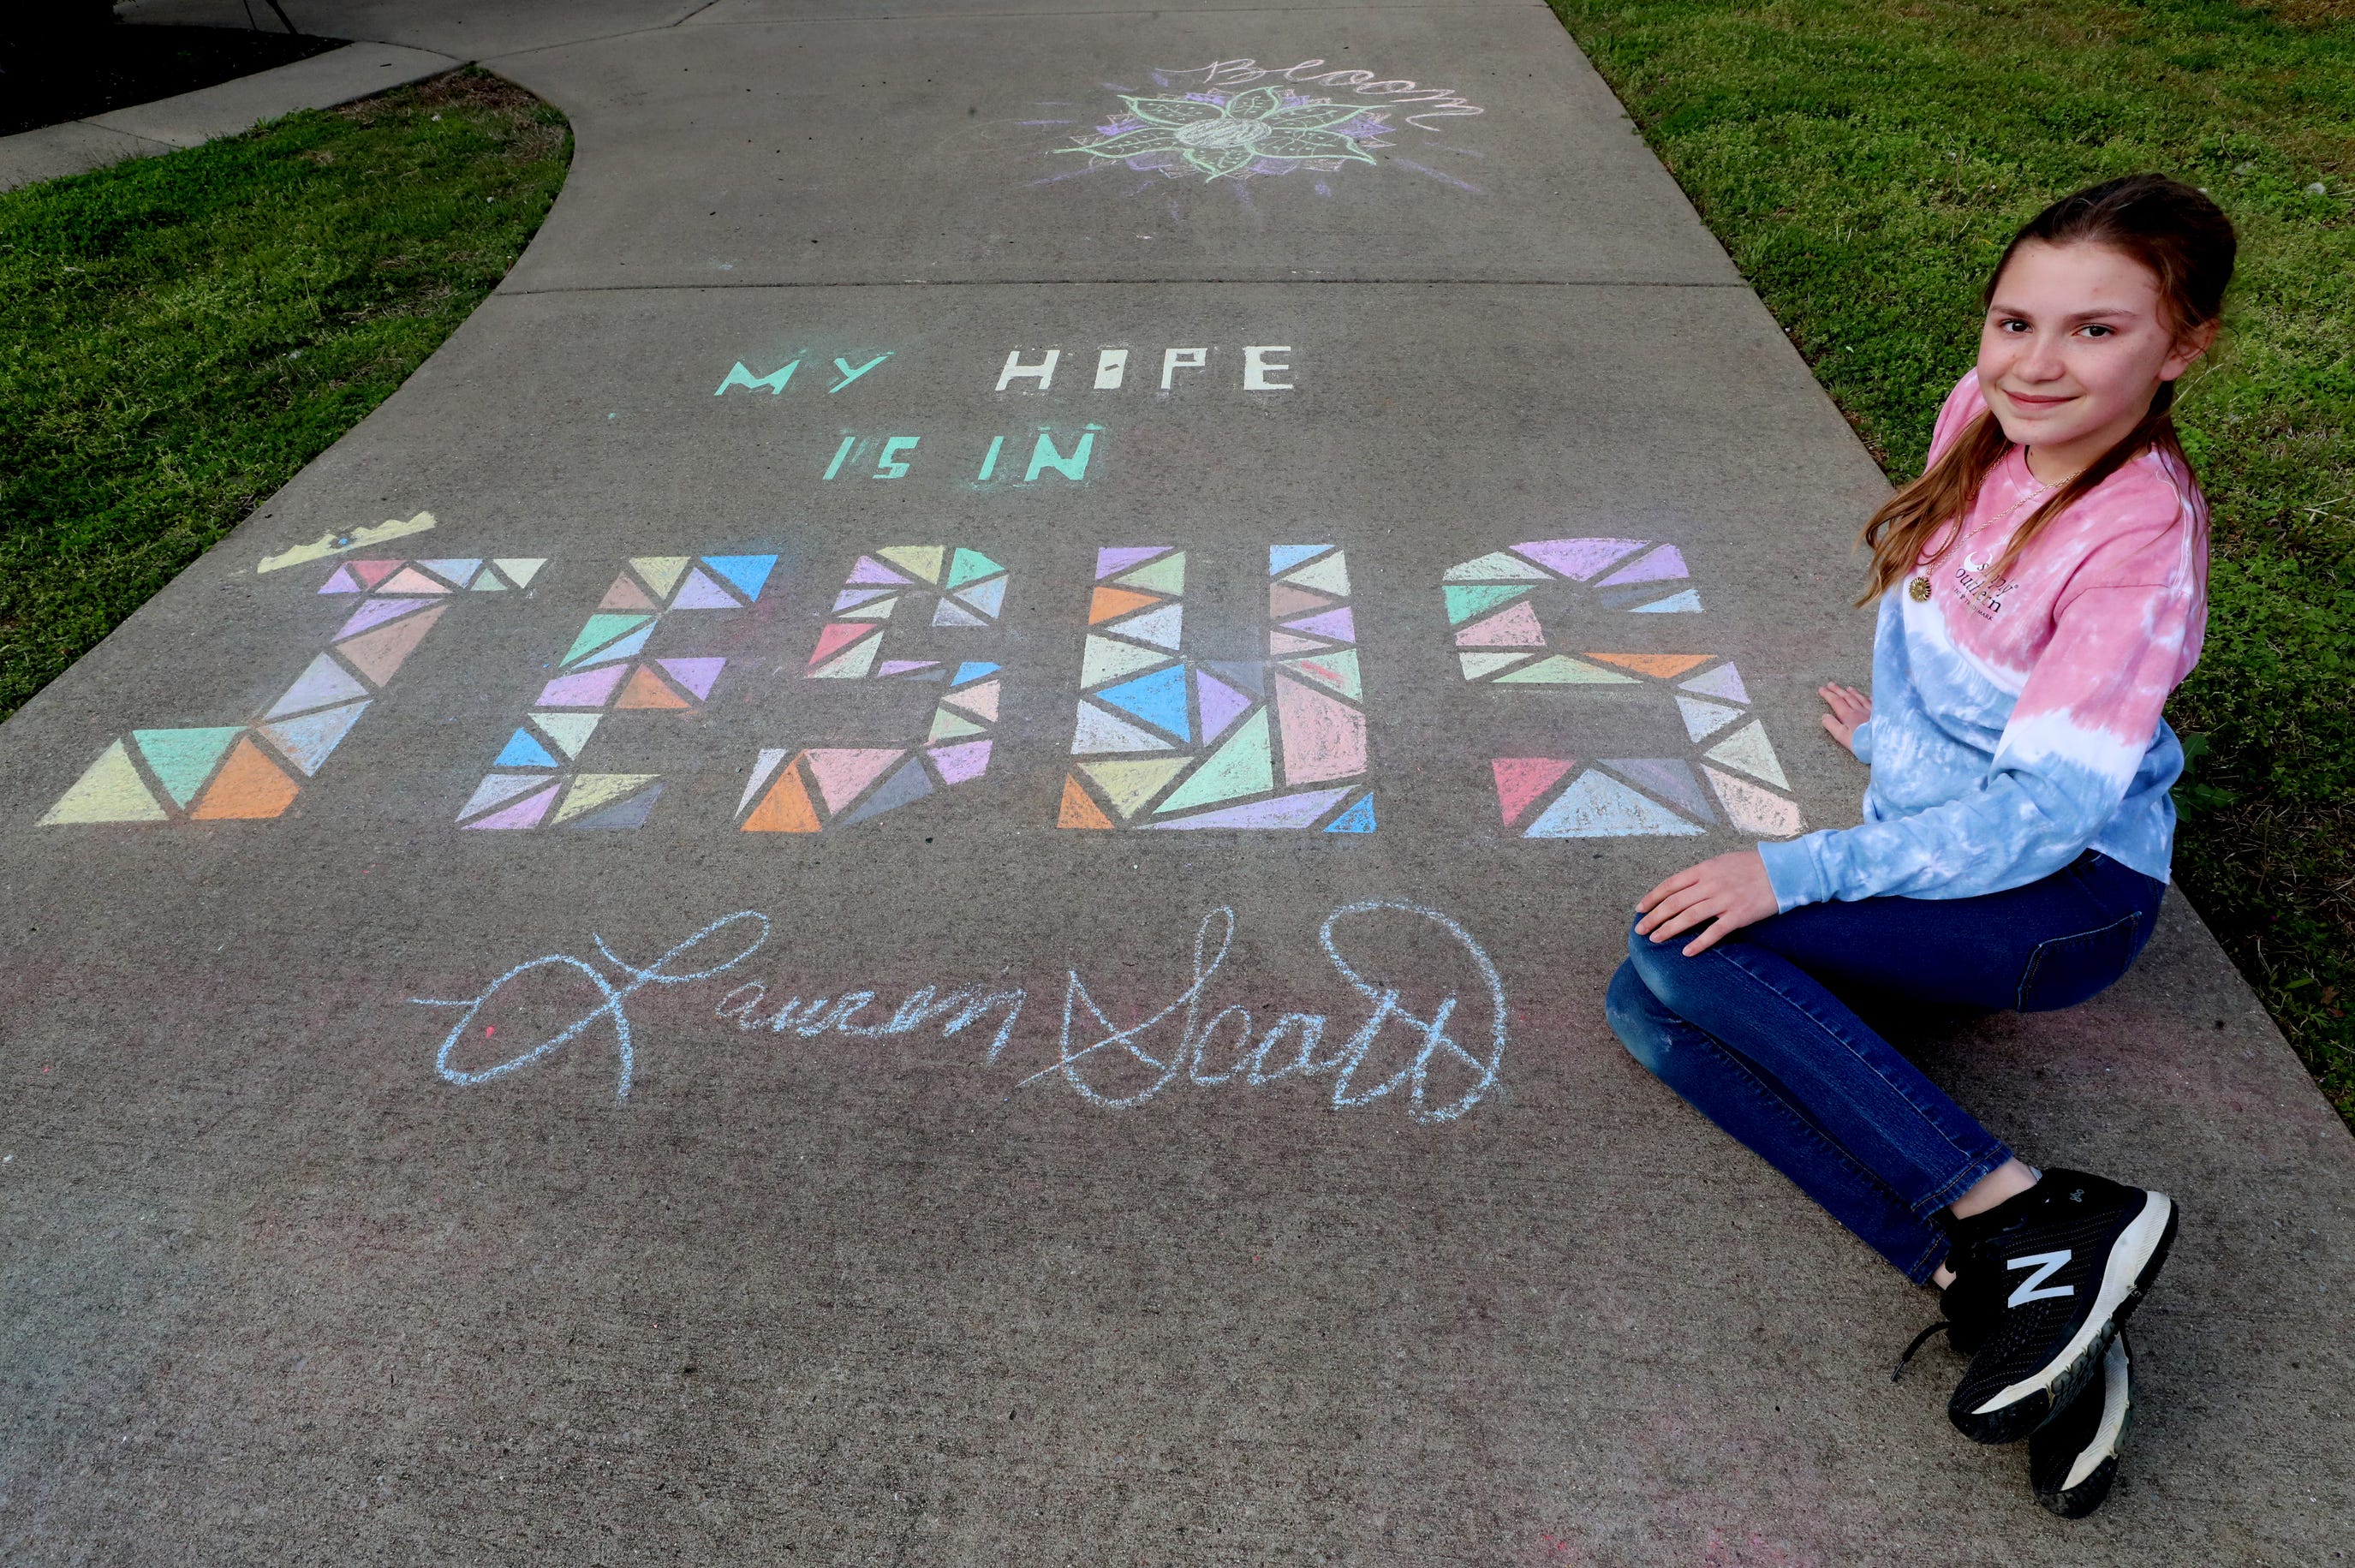 Murfreesboro Girls Spread Hope During Covid 19 Crisis With Chalk Art